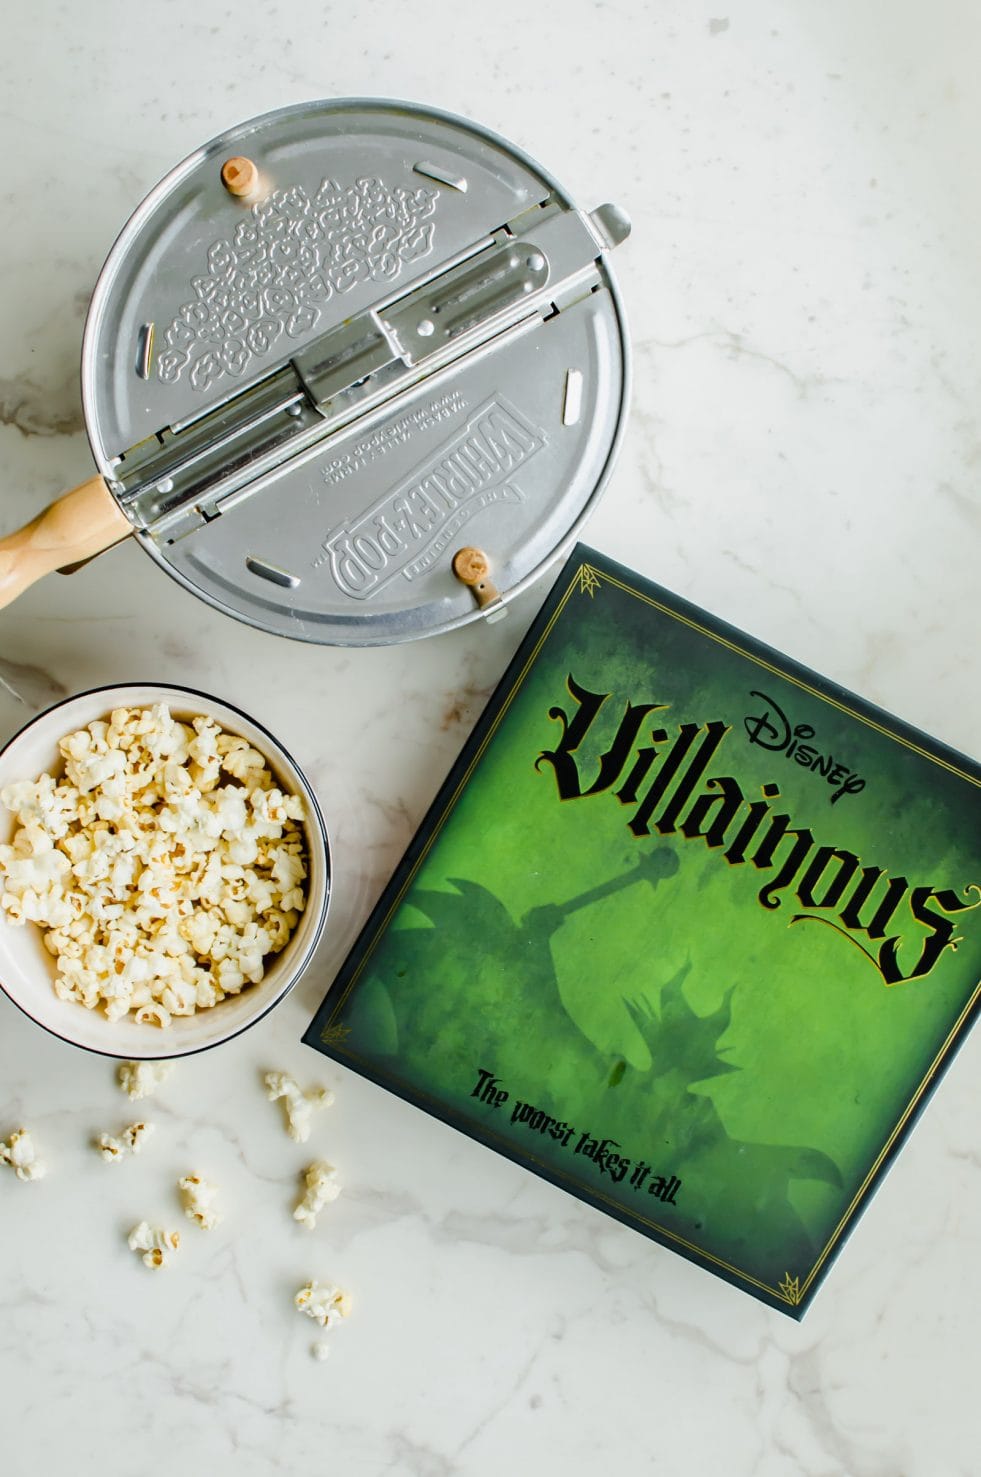 The Disney Villainous game next to a Whirly Pop and bowl of popcorn.